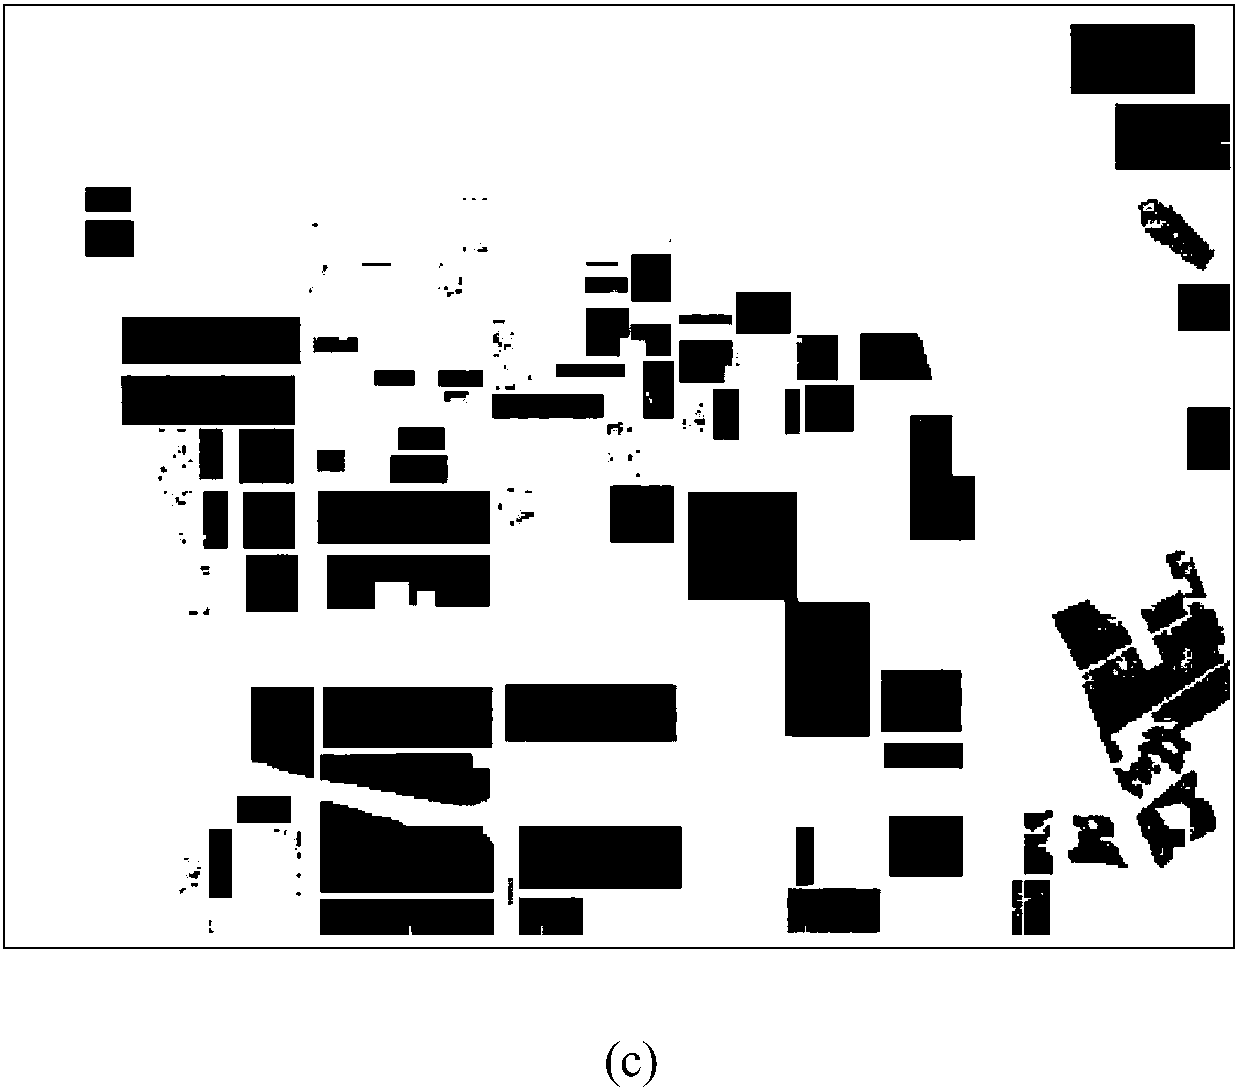 Scattering energy and stack self-code-based polarimetric SAR image classification method